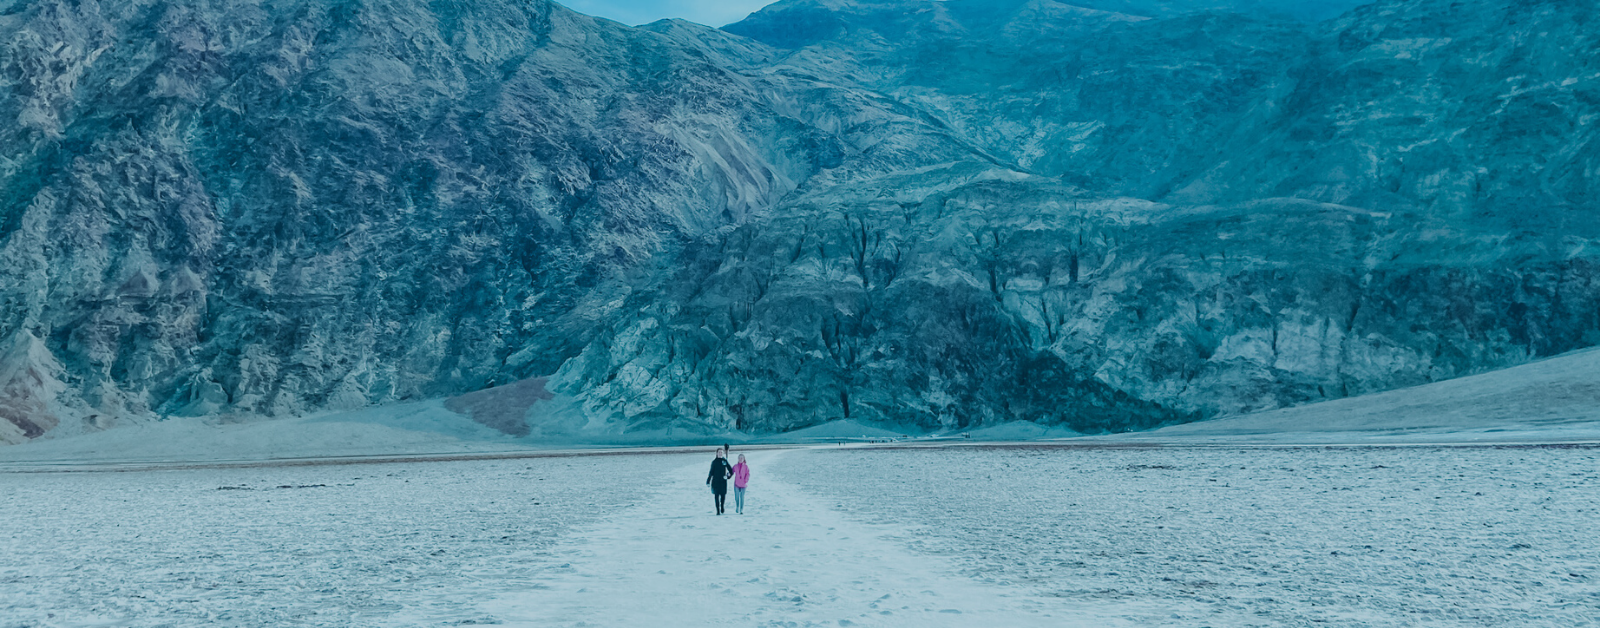 mountains in the background with people walking on a path in the distance across salt flats